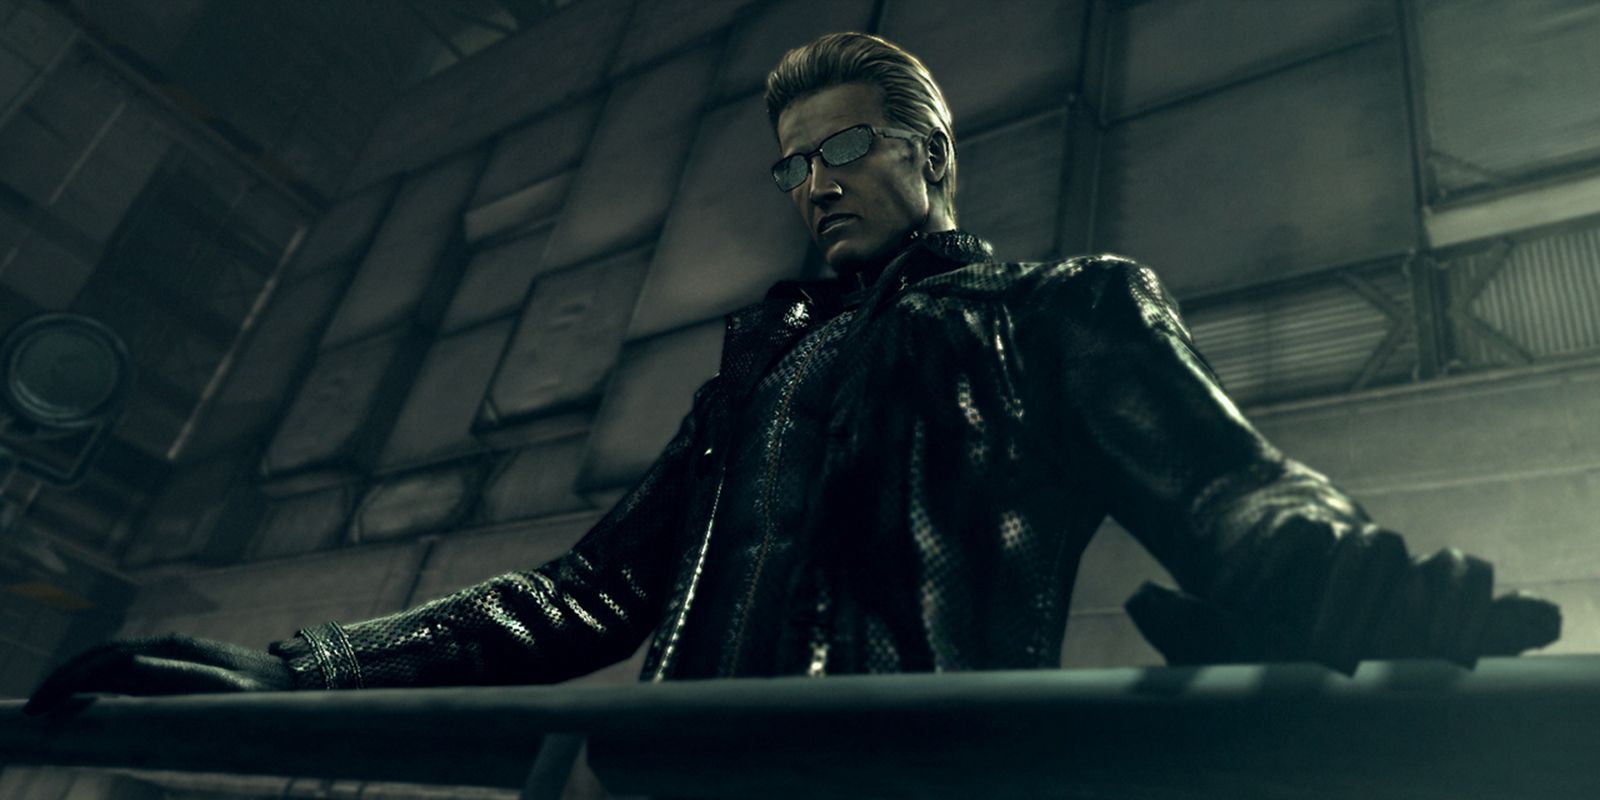 Albert Wesker placing his hands on a railing from high above and staring down menacingly in Resident Evil 5.